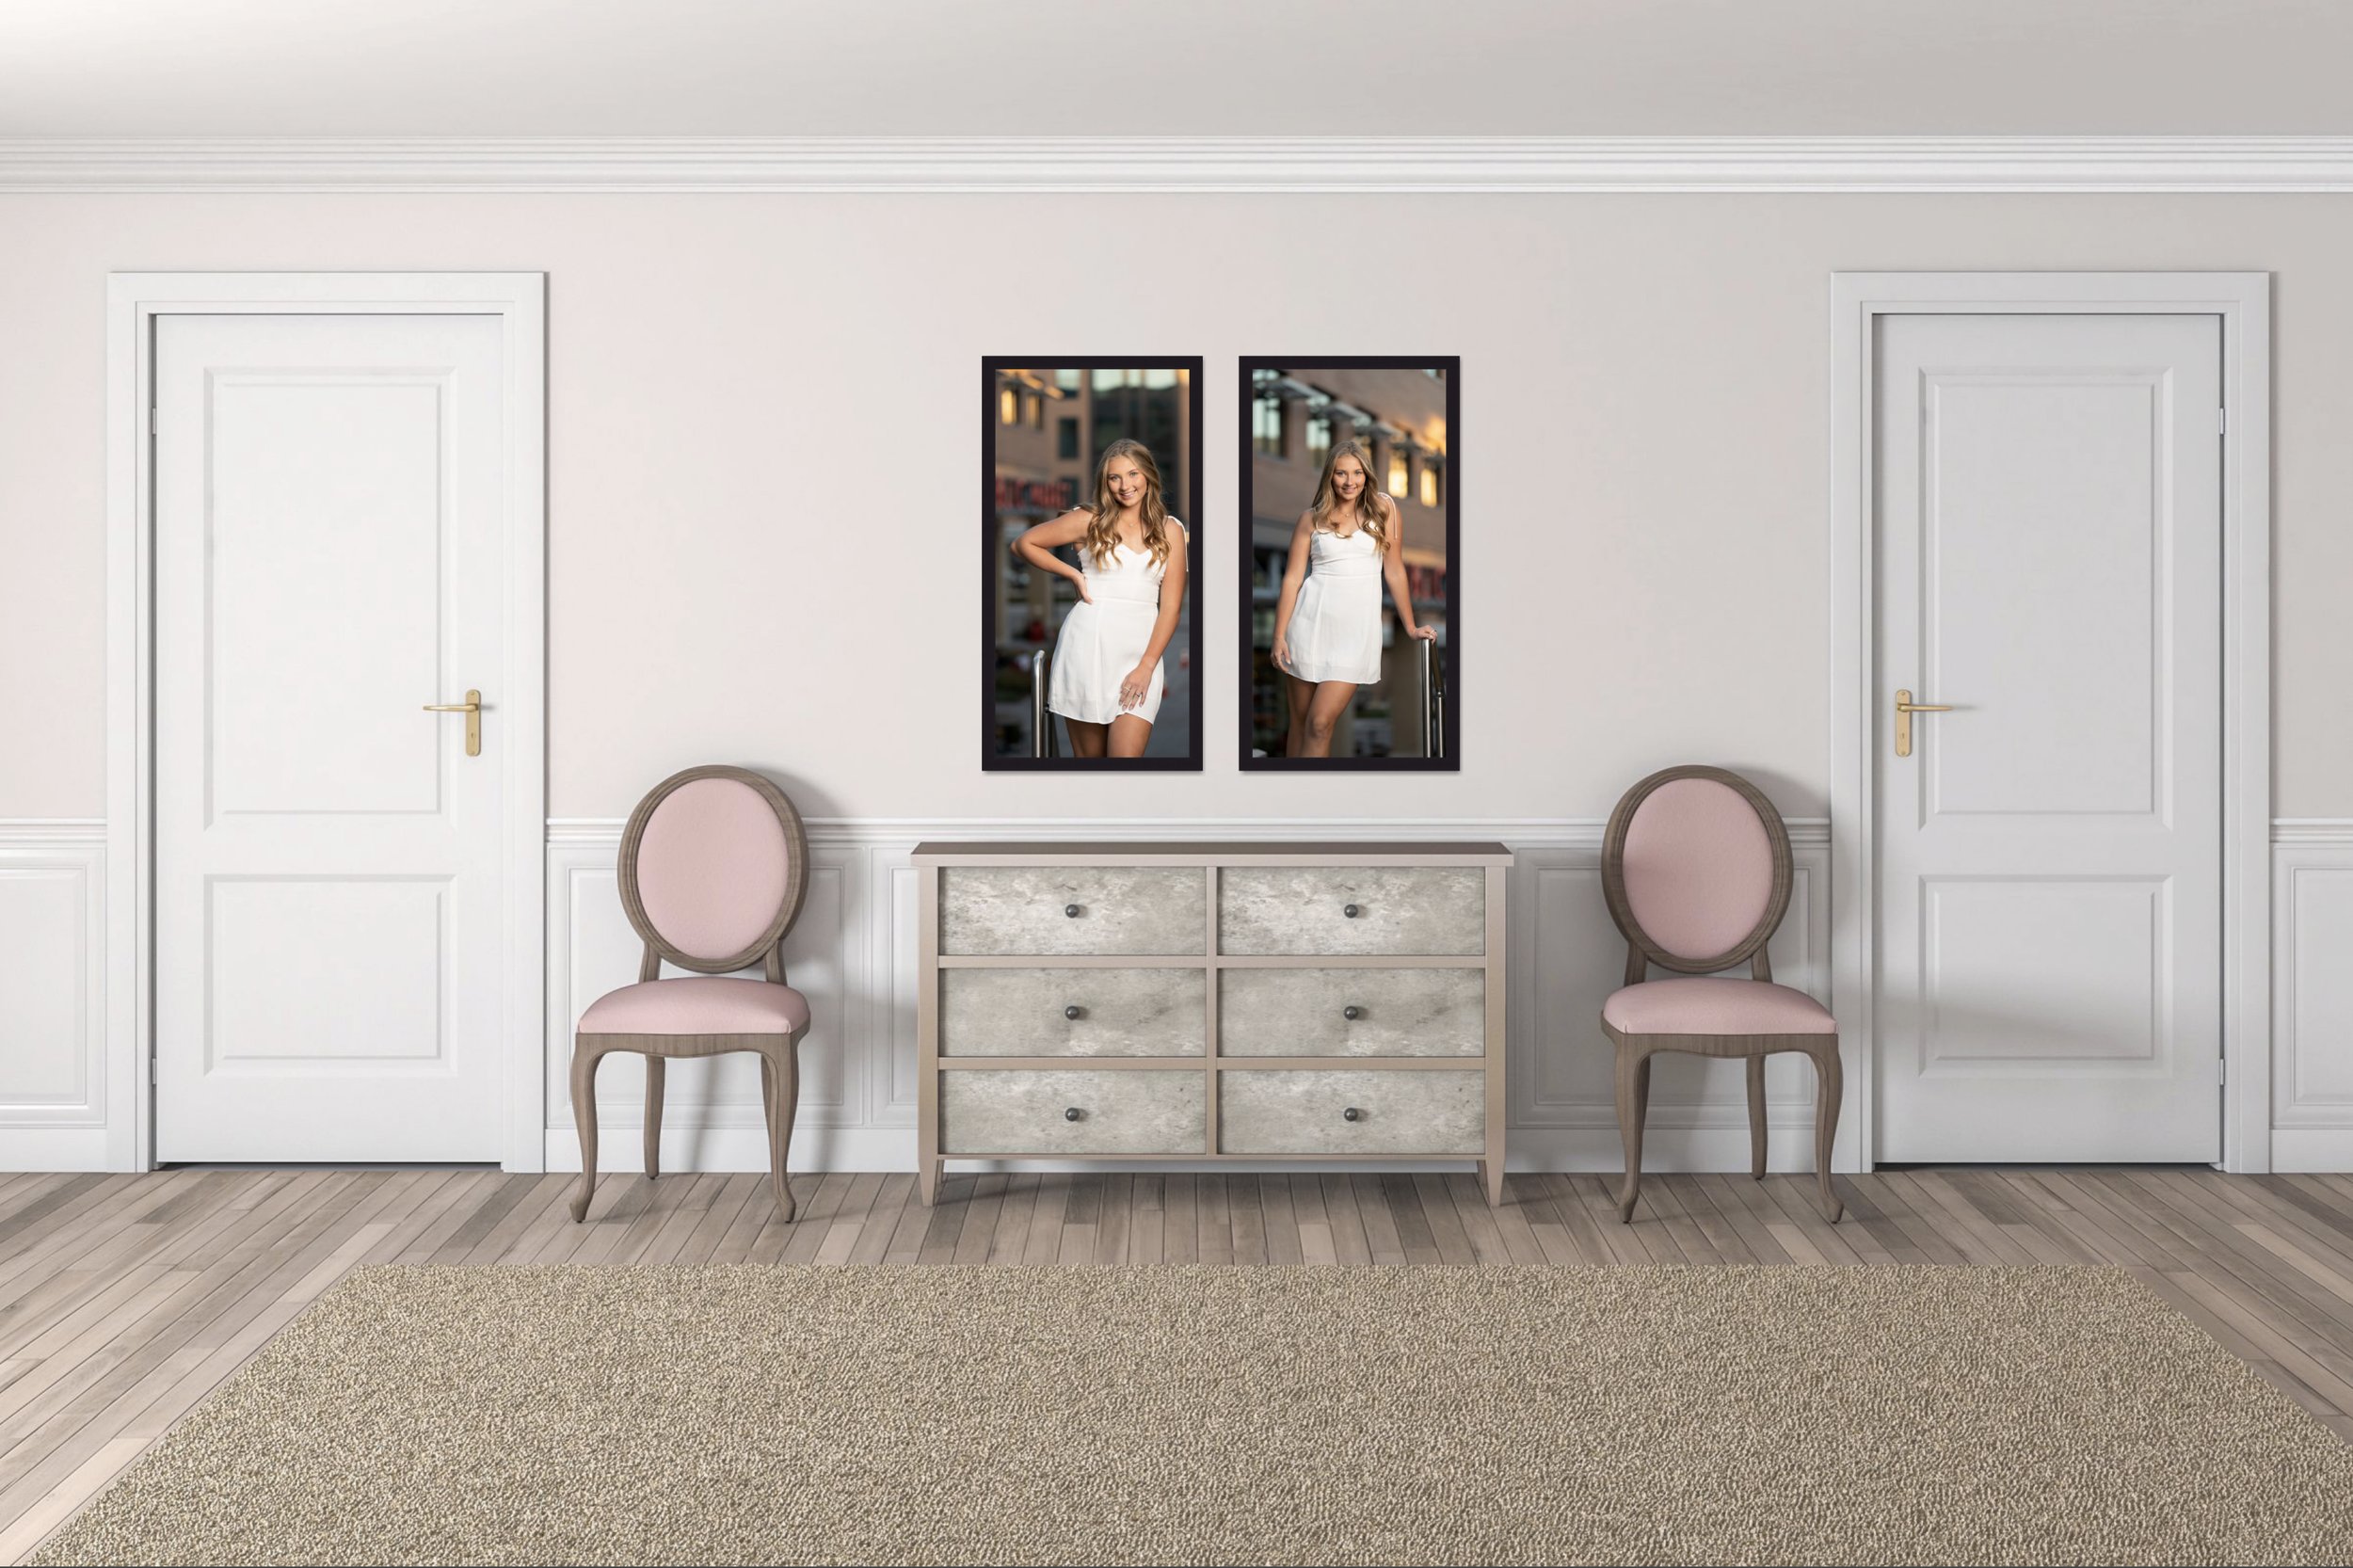  Choosing products like a wall design to display your photos 